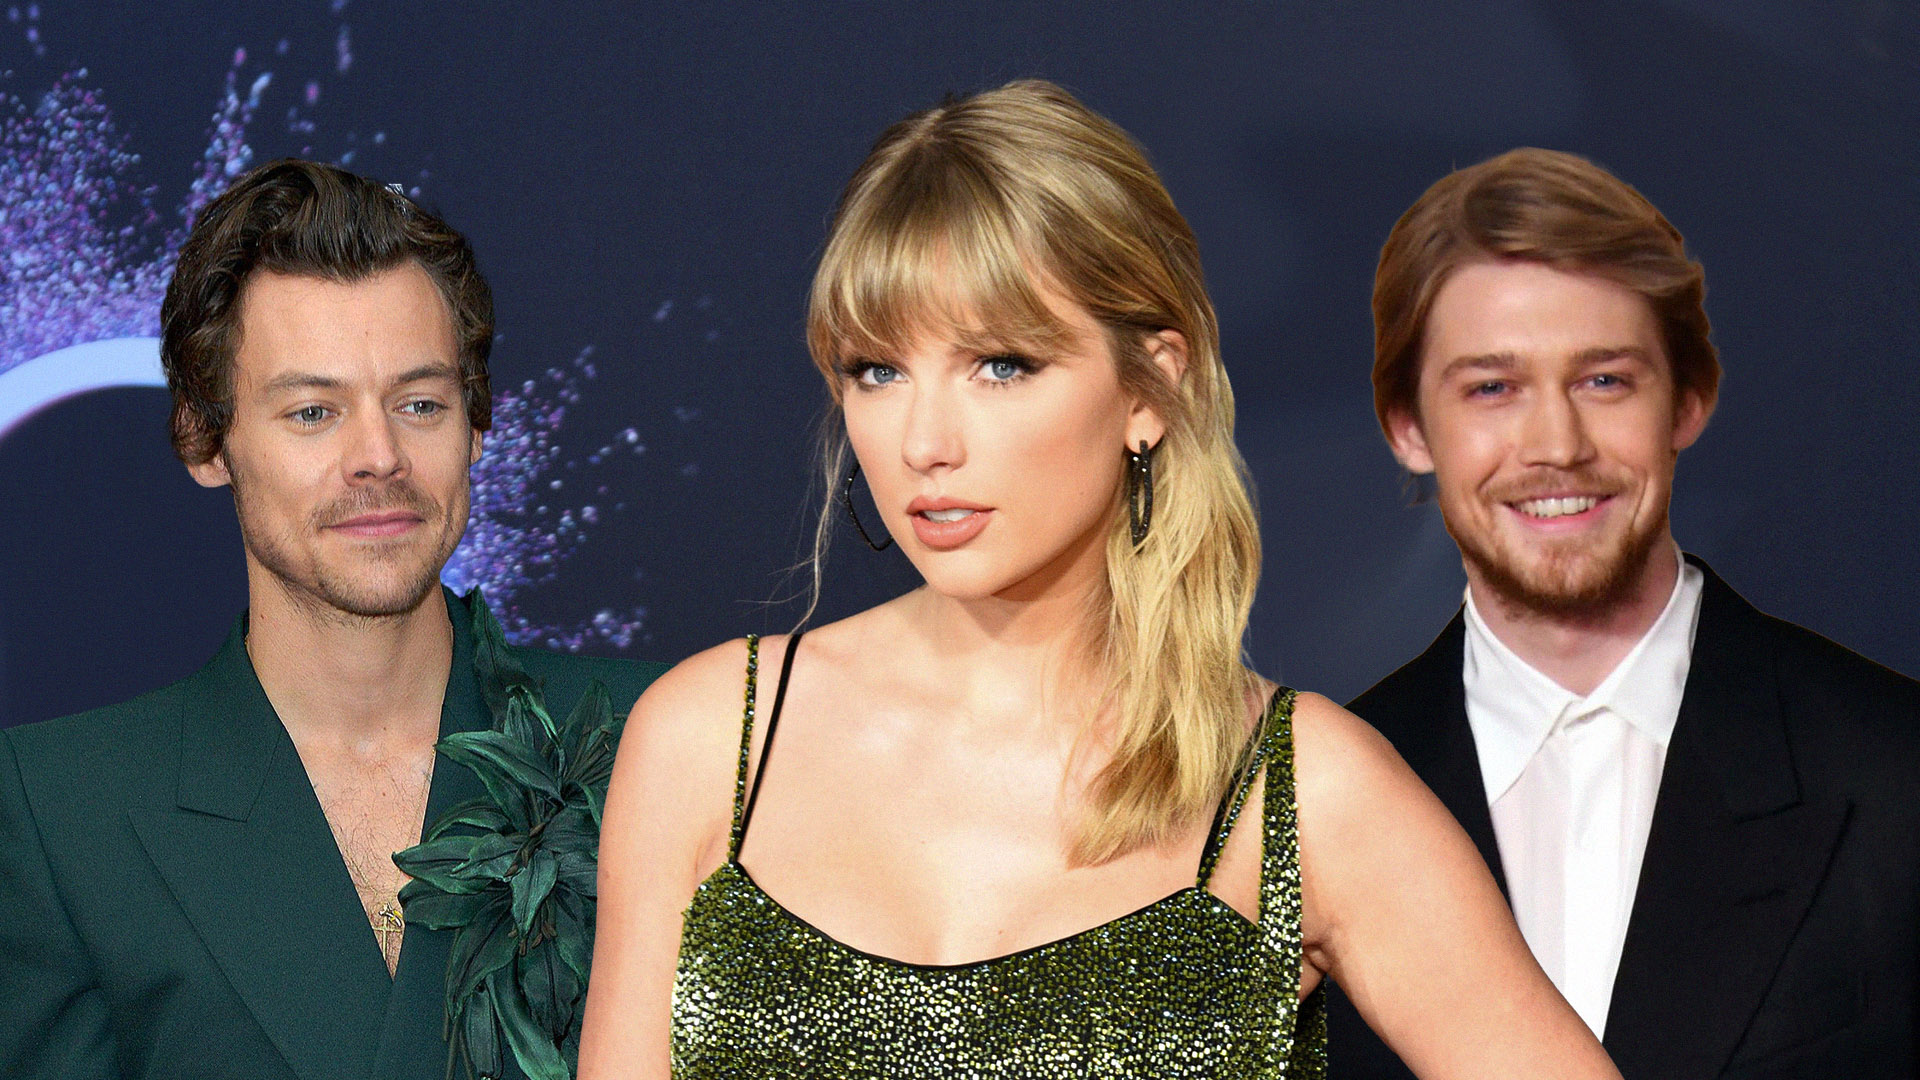 From Joe to Harry: A Comprehensive Guide to Taylor Swift's Celeb Exes